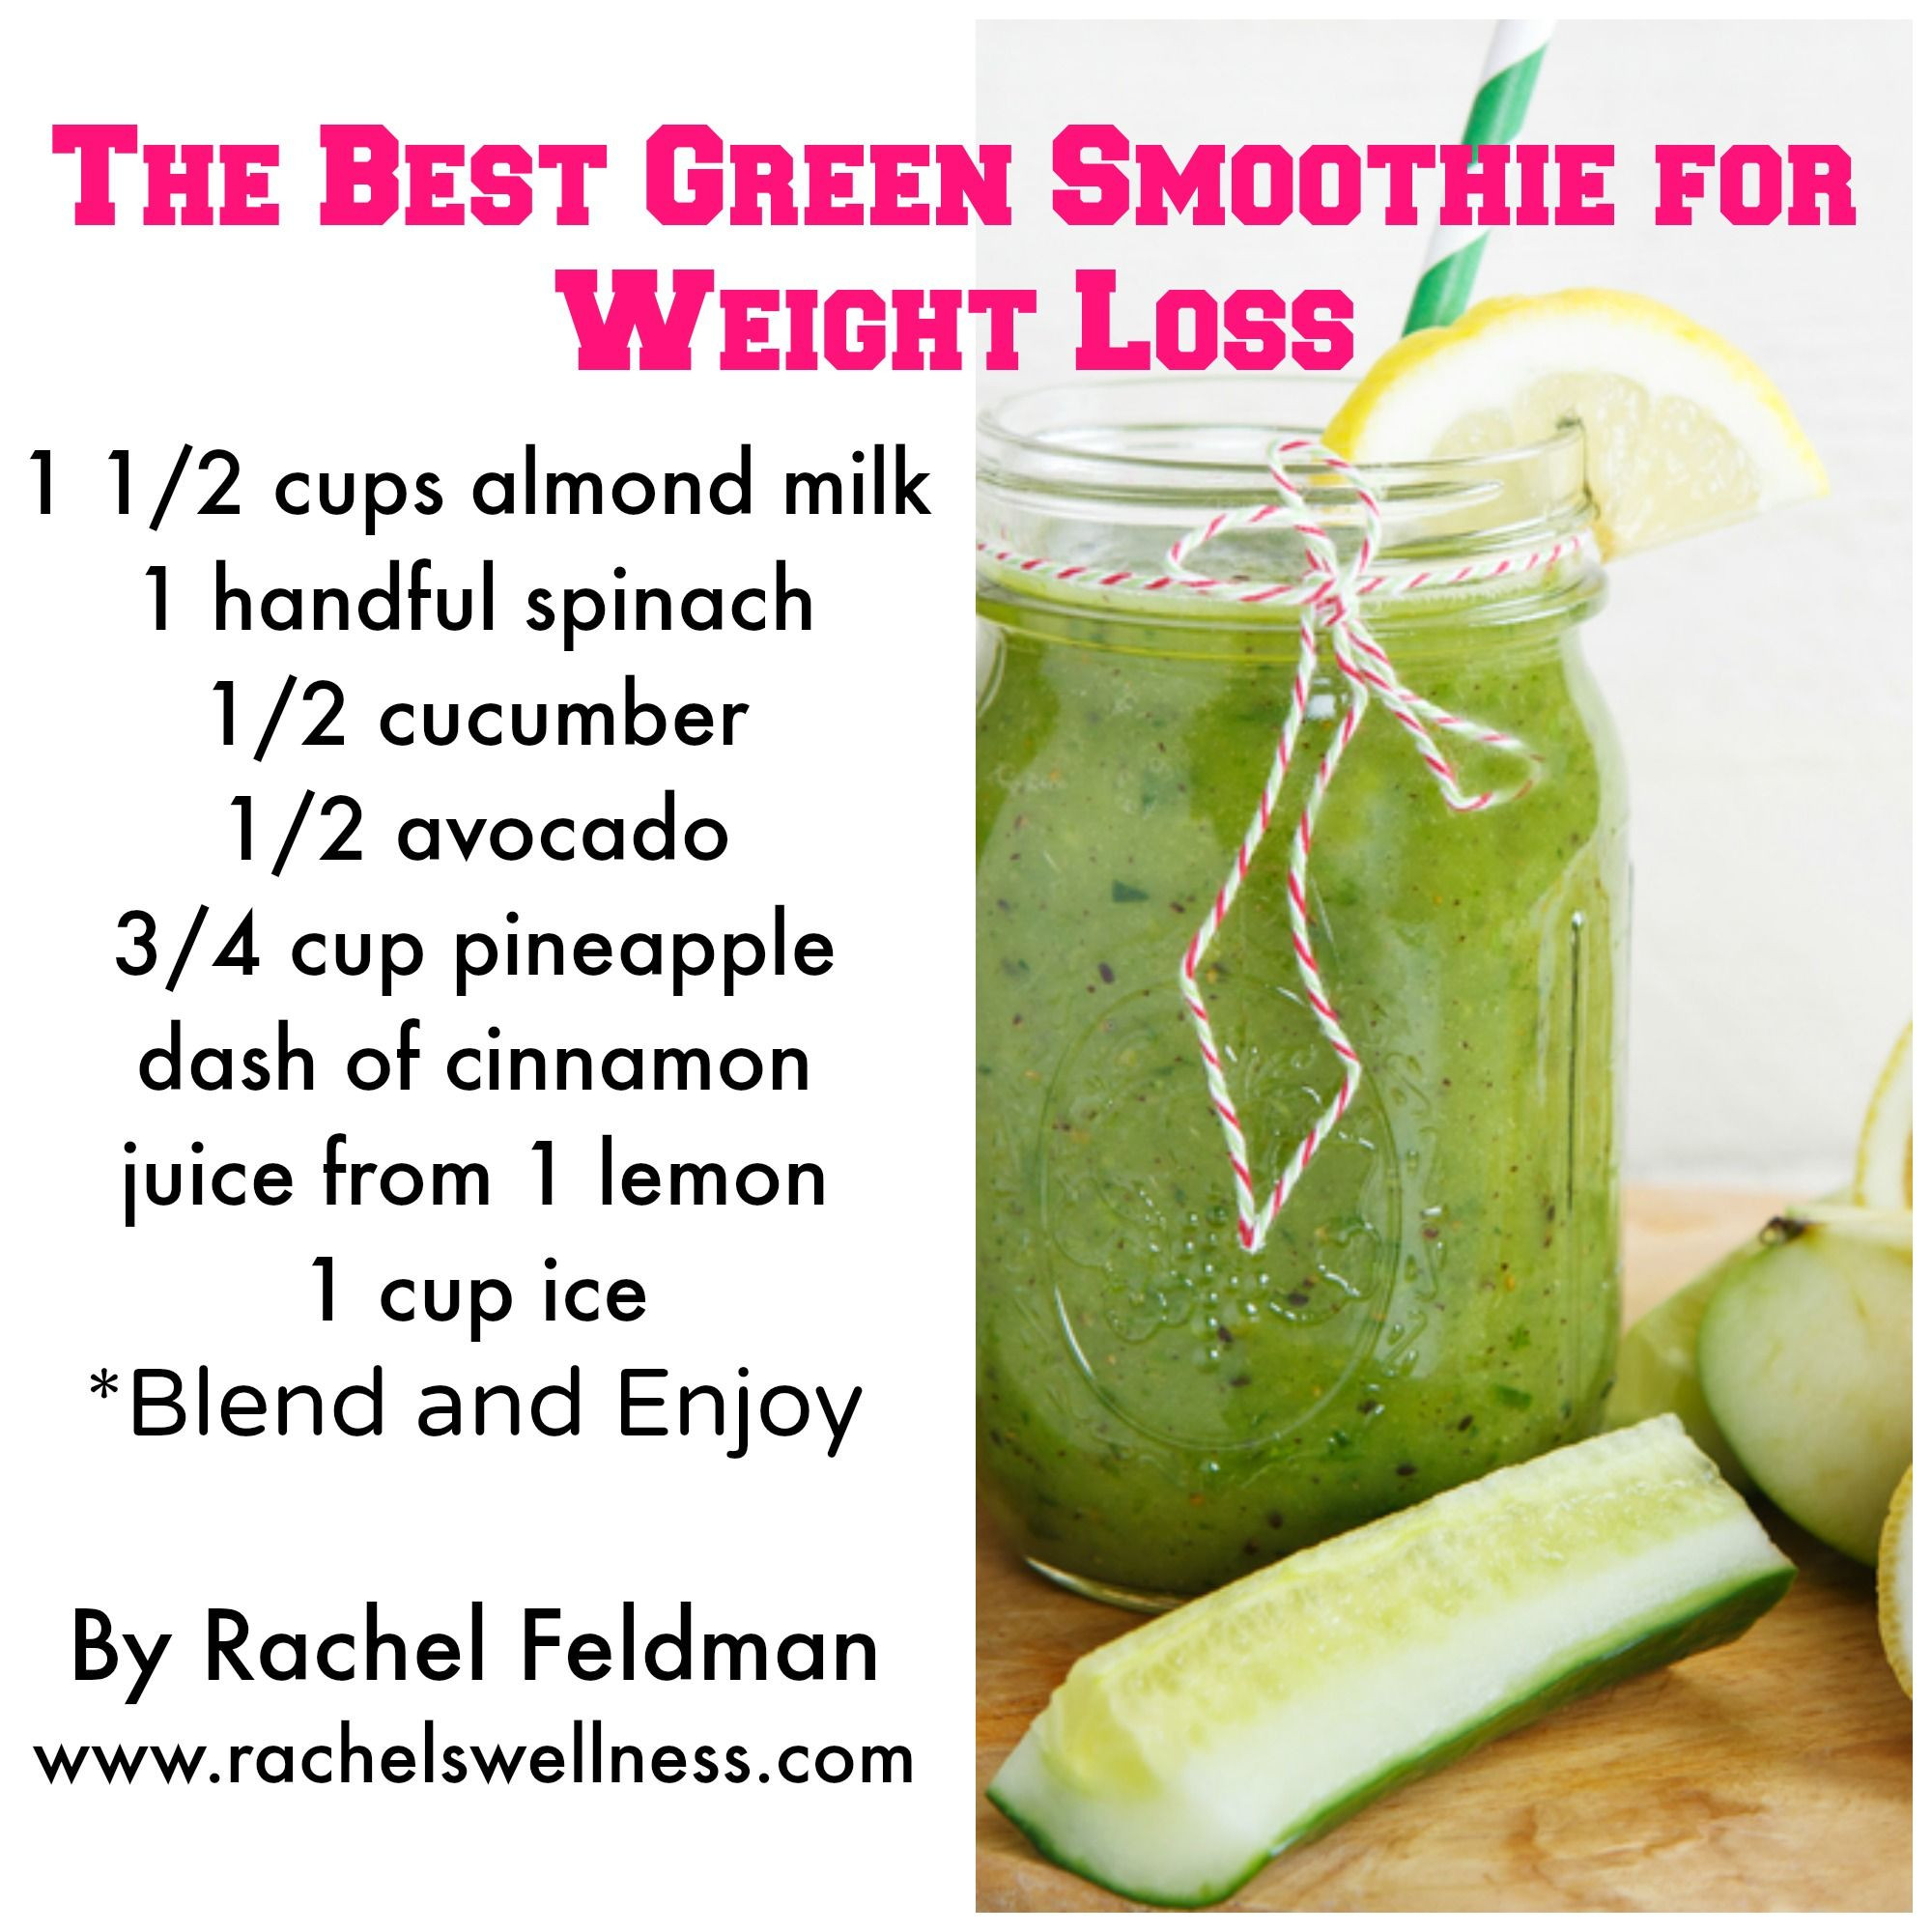 Dairy Free Weight Loss Smoothies
 7 Healthy Green Smoothie Recipes For Weight Loss